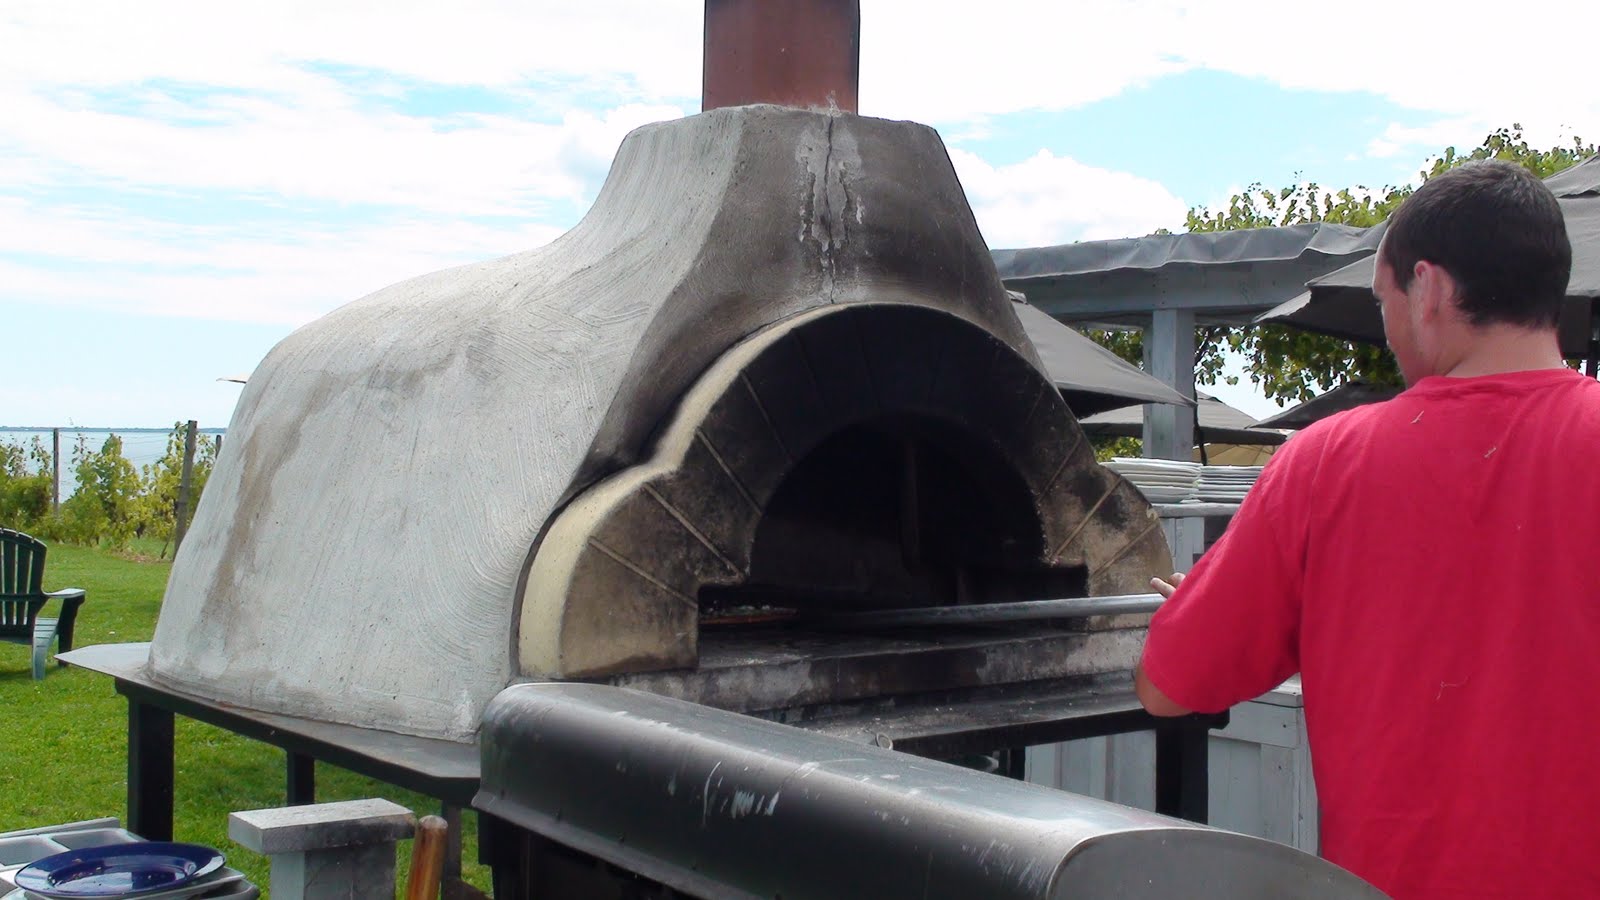 Wood fired pizza oven.